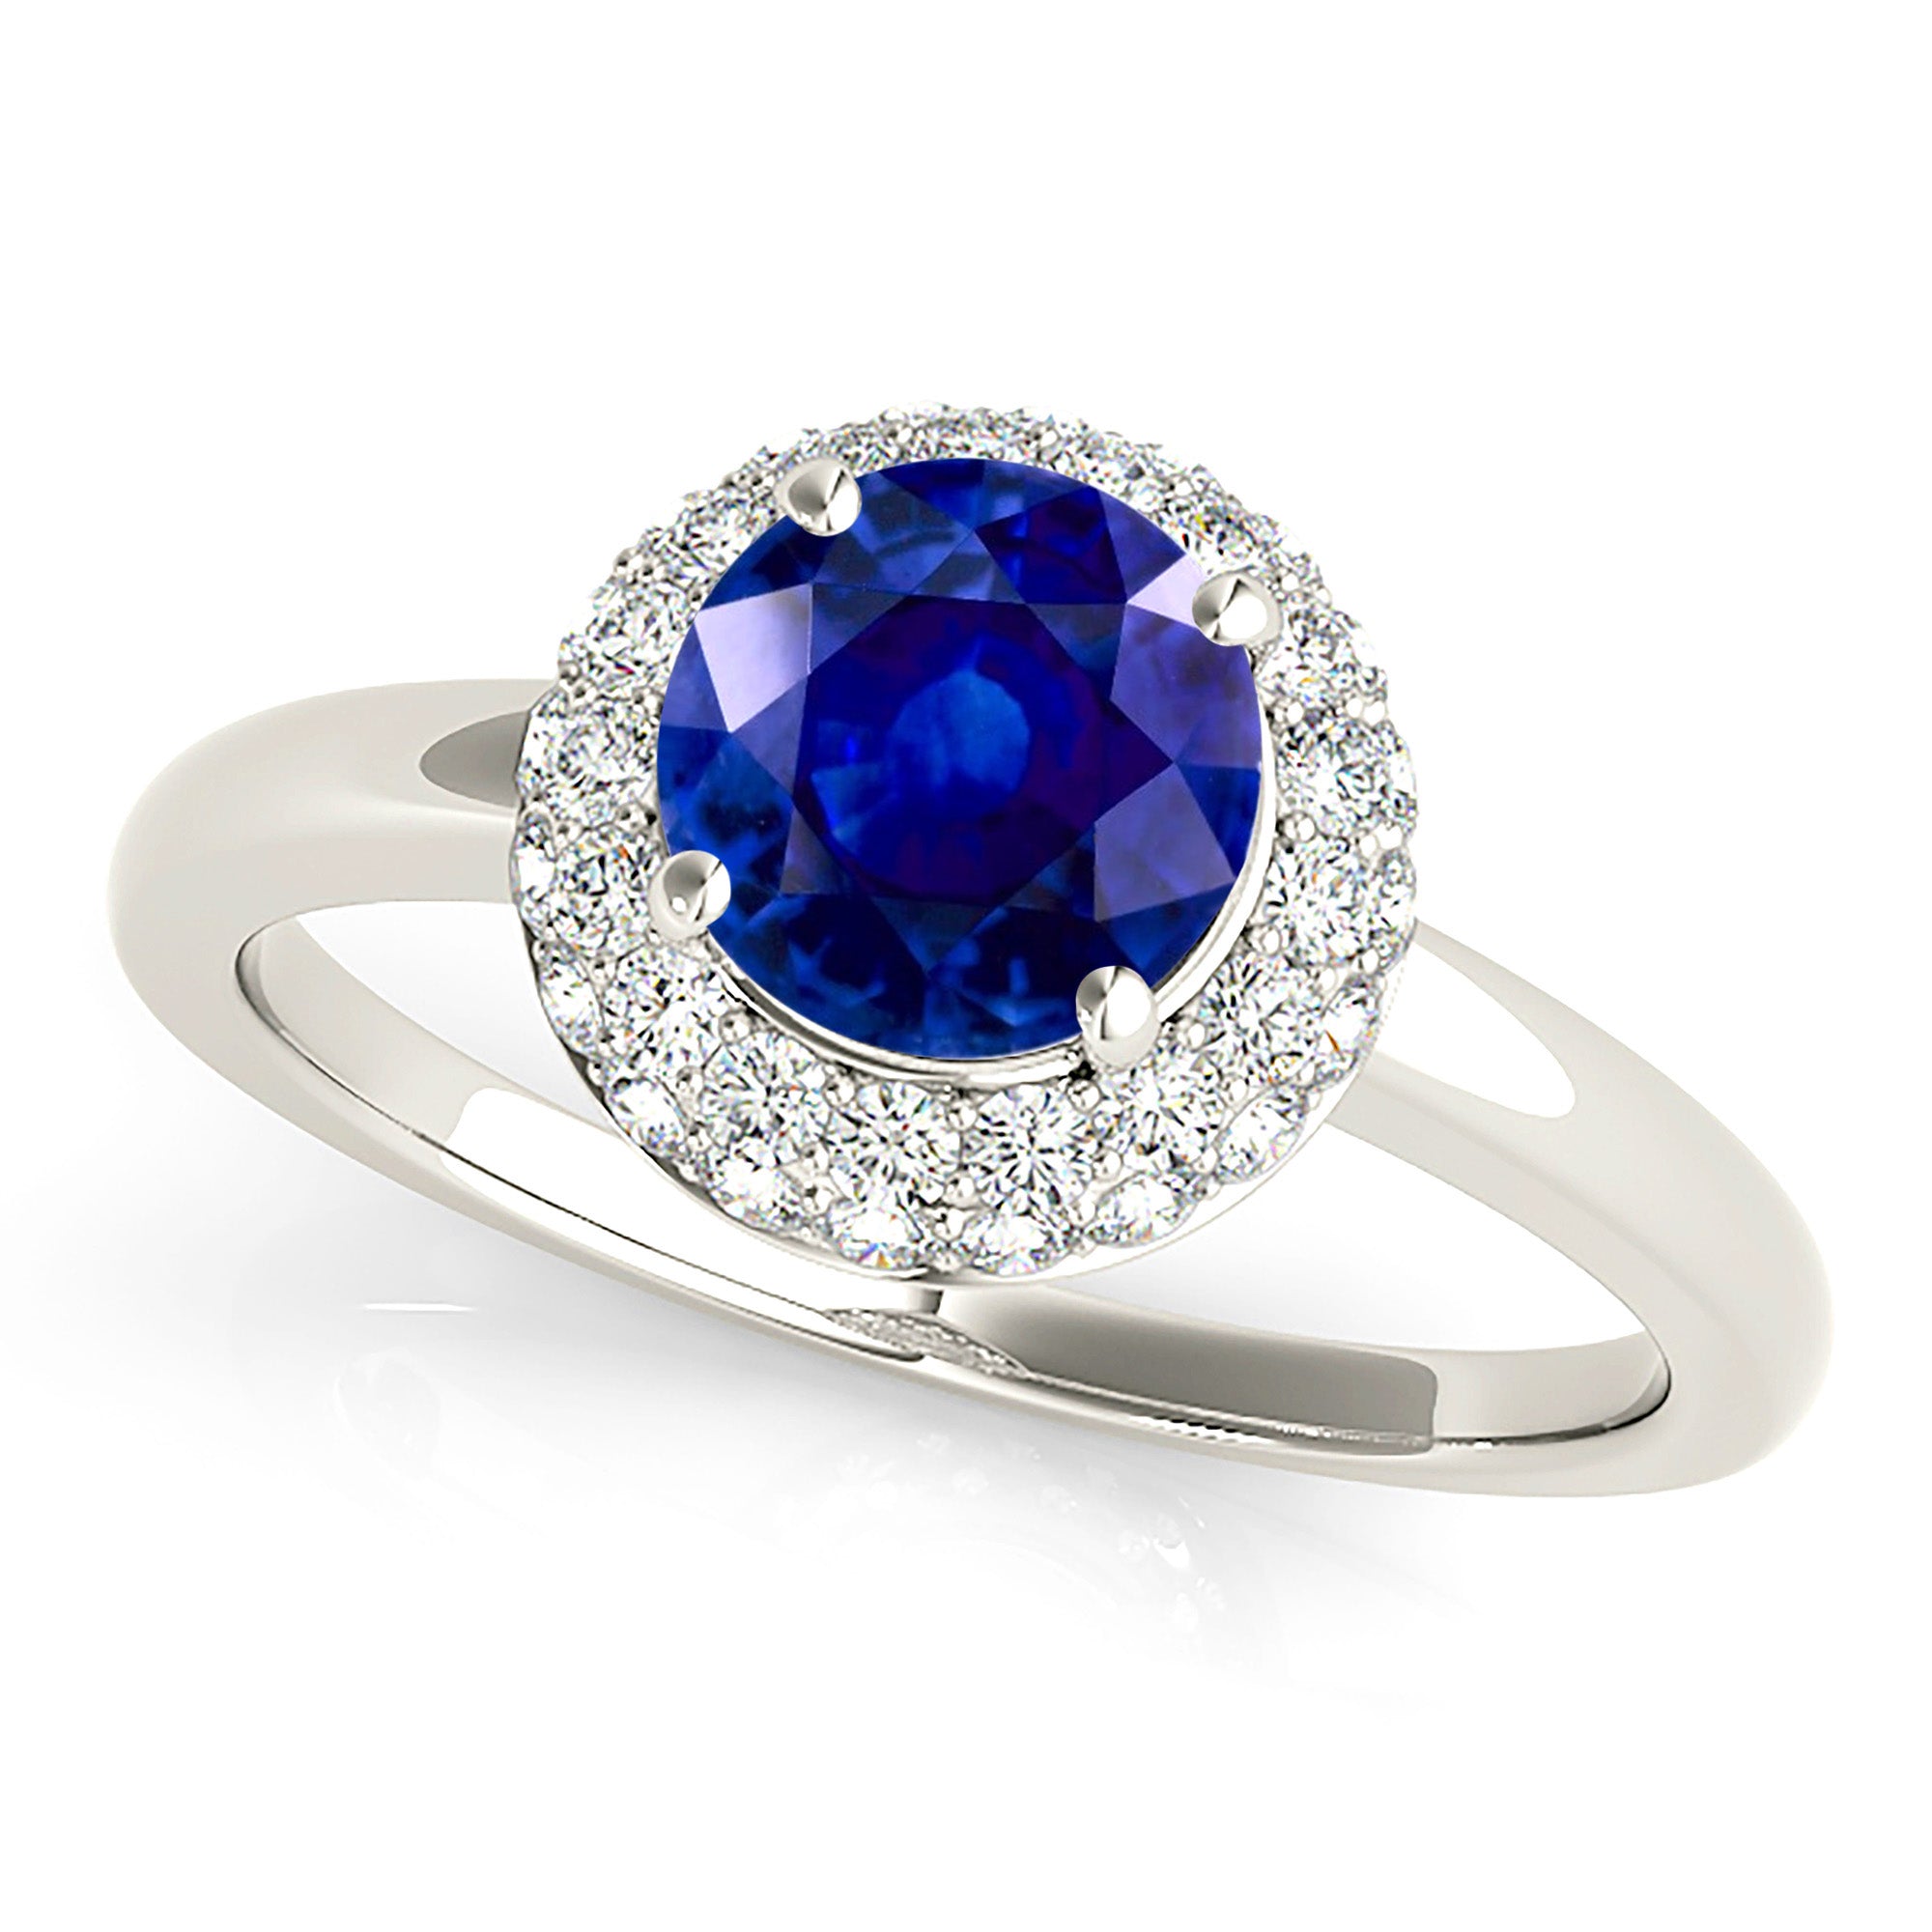 1.35 ct. Genuine Blue Sapphire Solitaire Halo Ring With 0.40 ctw. Pave Set Side Diamonds-in 14K/18K White, Yellow, Rose Gold and Platinum - Christmas Jewelry Gift -VIRABYANI